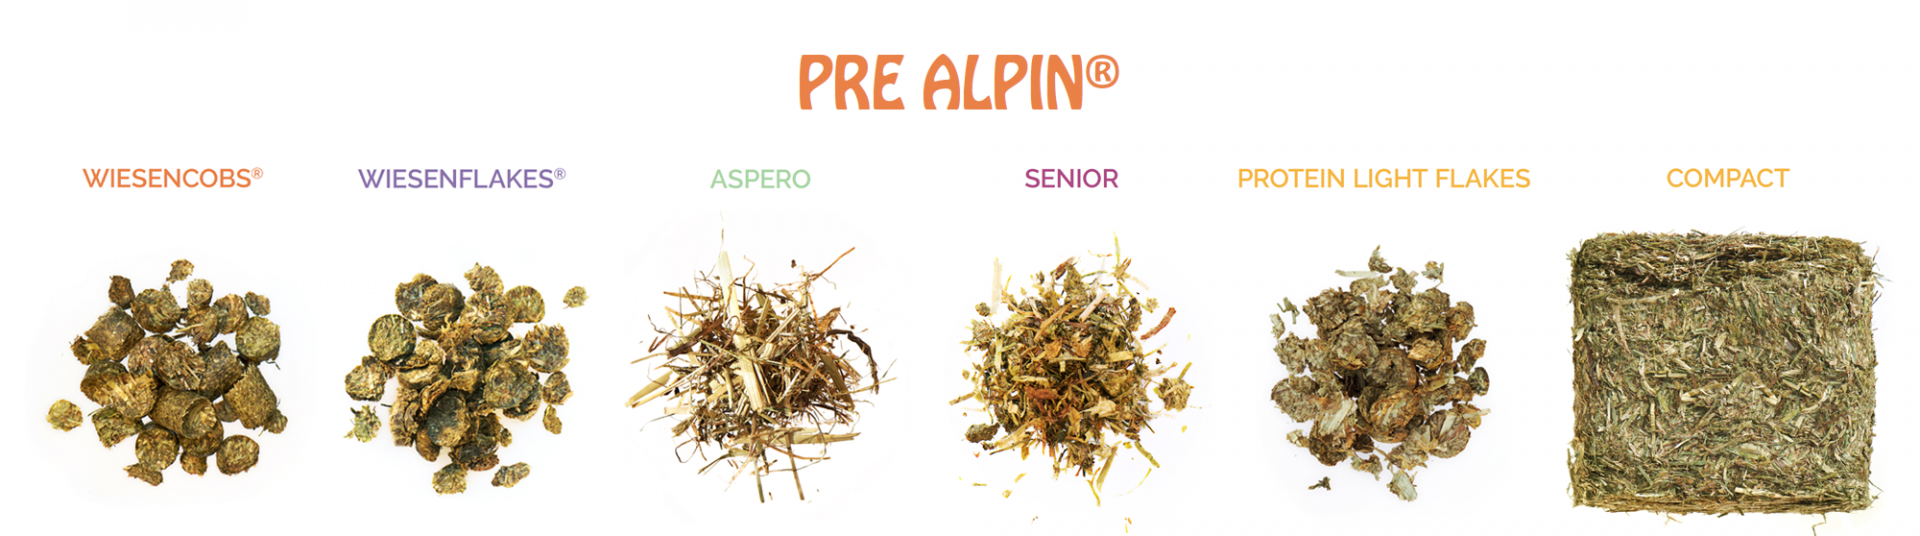 Overview about all Pre Alpin products